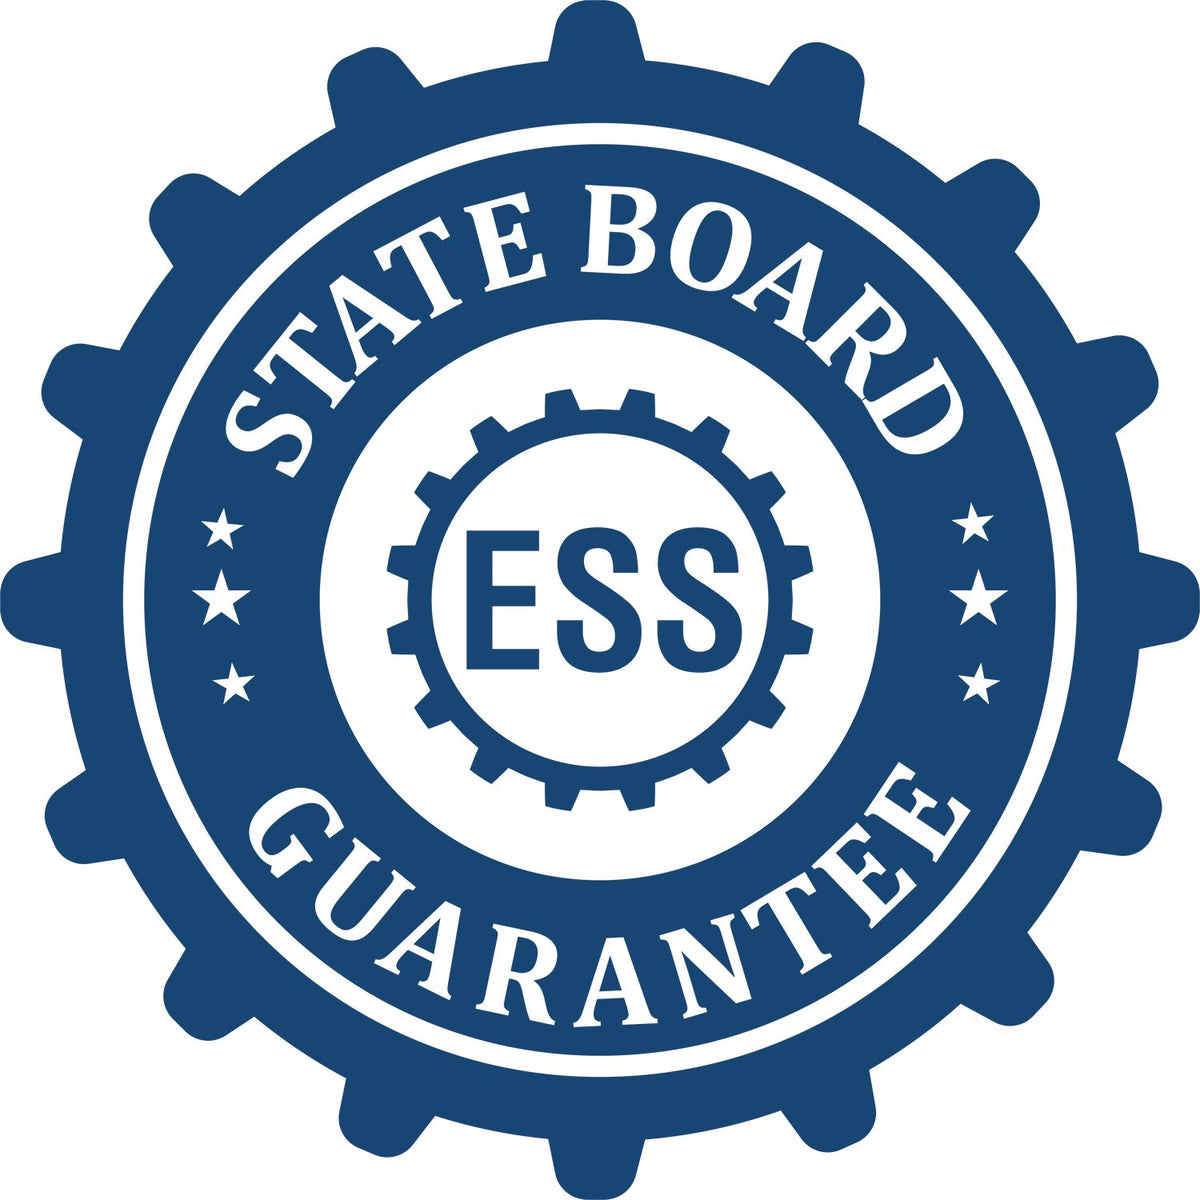 An emblem in a gear shape illustrating a state board guarantee for the State of New Hampshire Extended Long Reach Engineer Seal product.